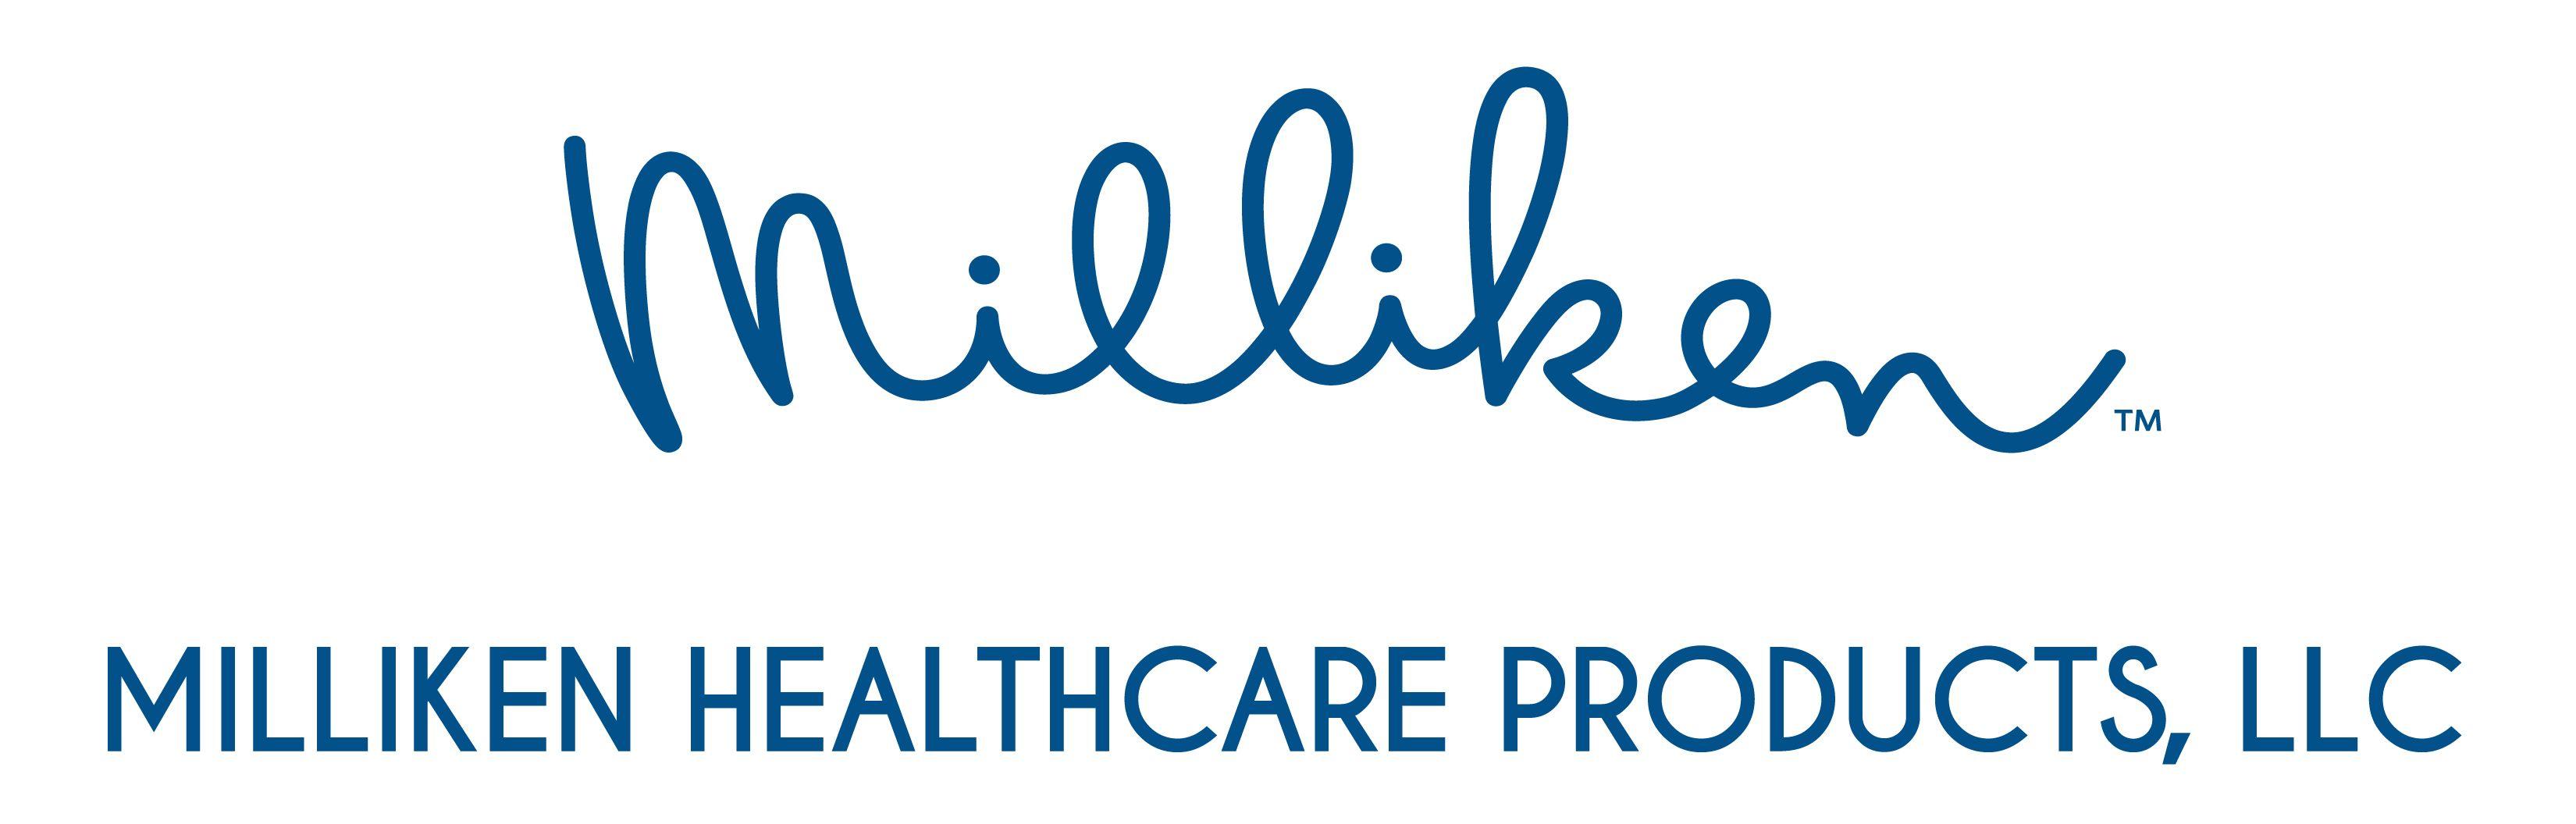 Milliken Logo - Milliken Healthcare Products, LLC - Wound, Ostomy and Continence ...